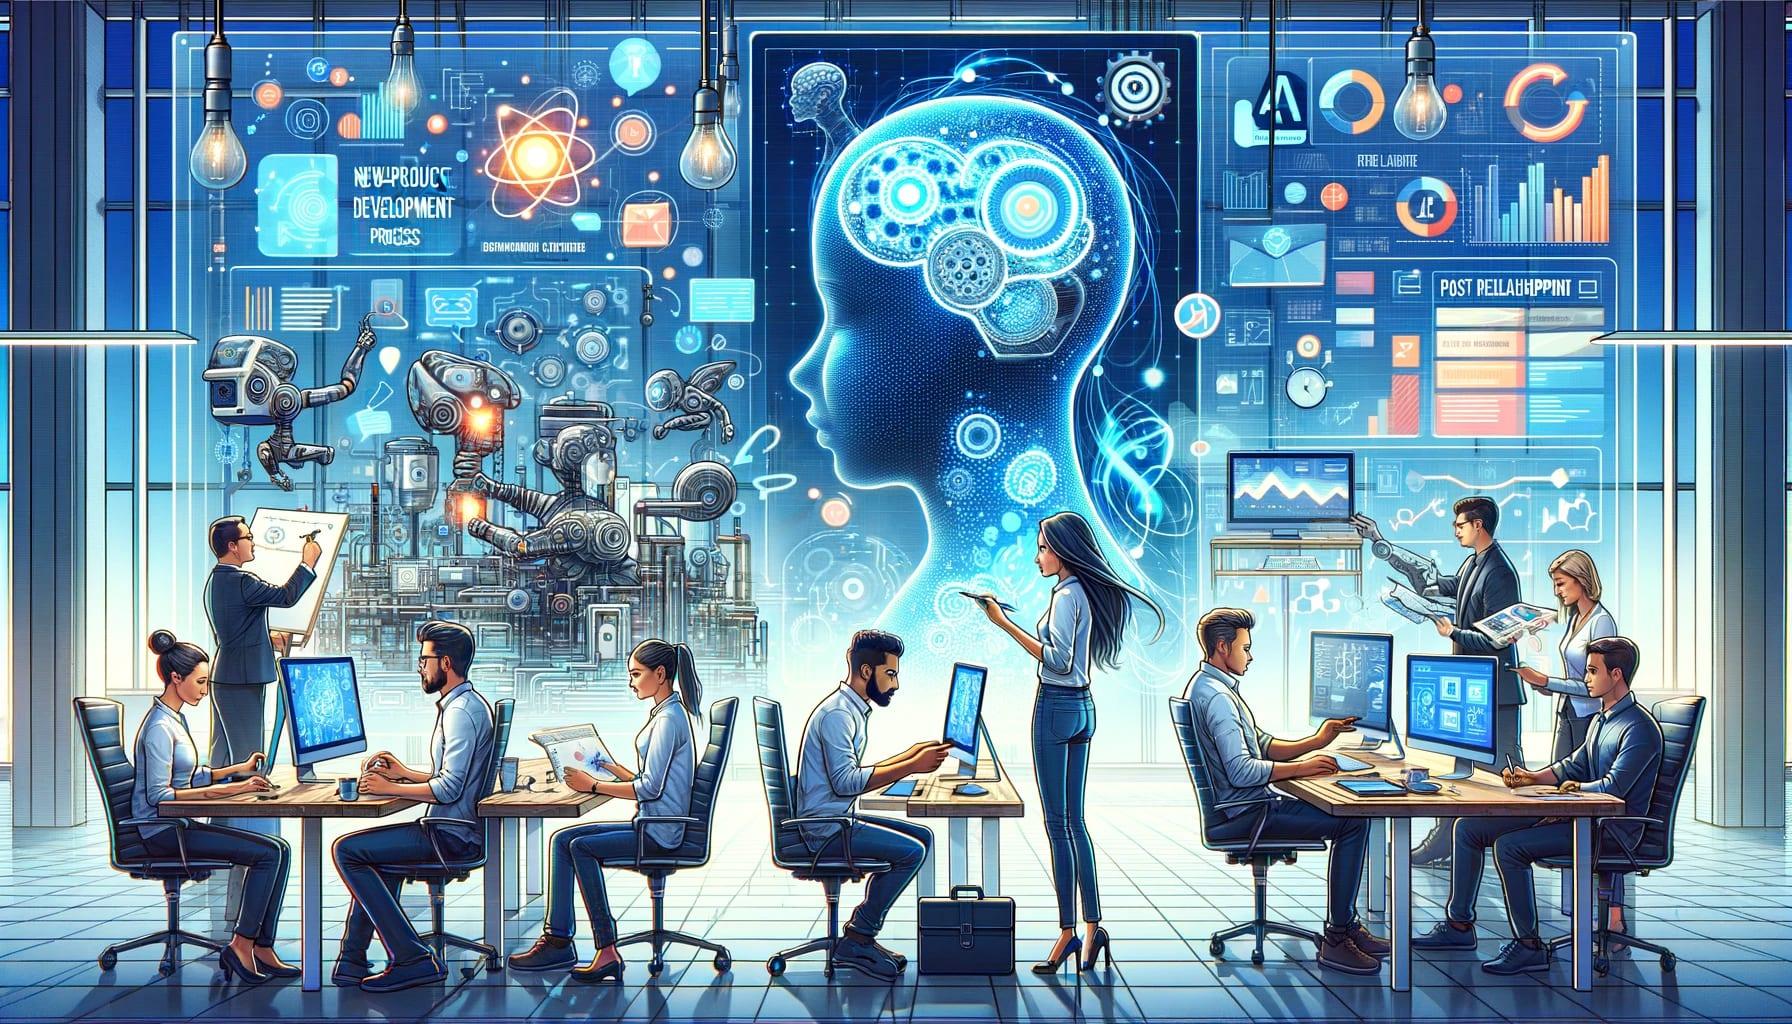 Illustration of an innovative tech workspace where robotics and artificial intelligence intersect, featuring professionals engaging with robotic machinery and AI-powered analytics. The image captures a dynamic office setting, where state-of-the-art robotics are being tested and developed, and a large digital brain showcases cognitive computing concepts